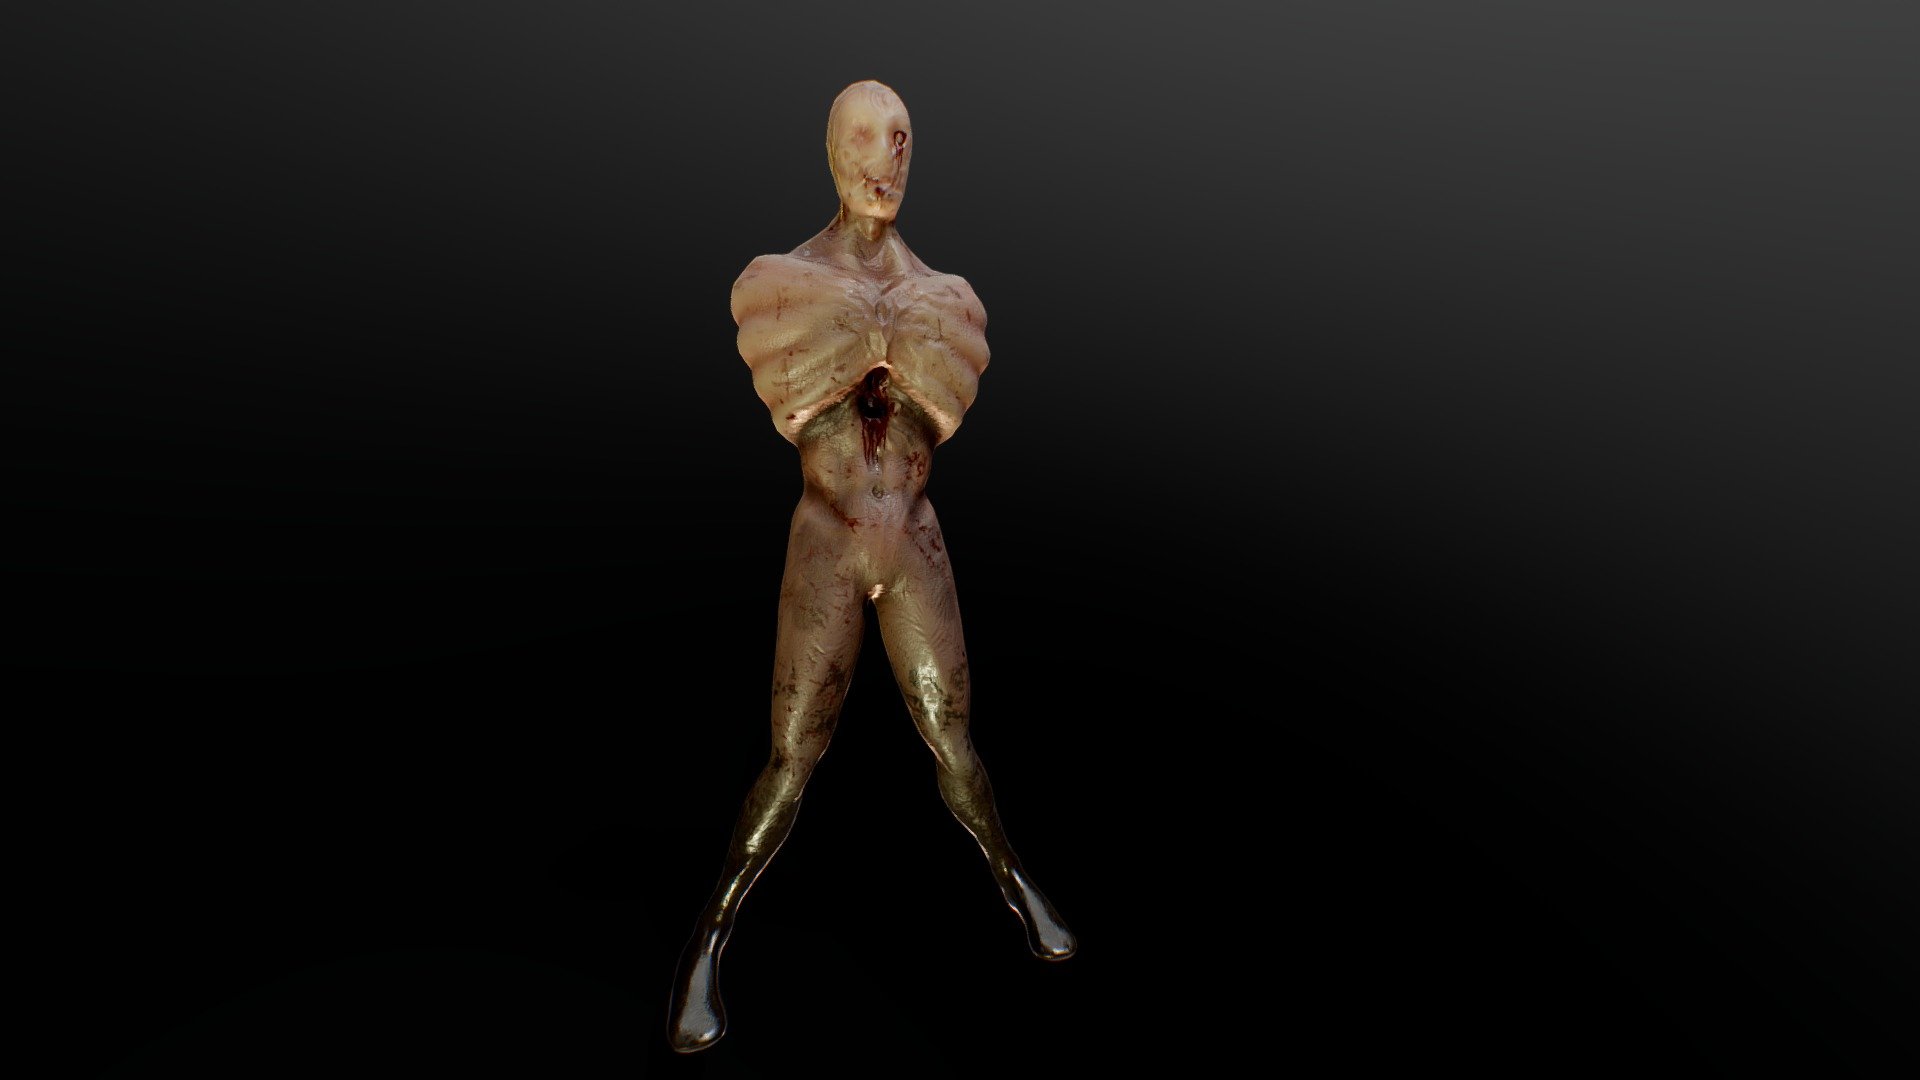 Thought I'd try and recreate the &lsquo;Lying Figure' from Silent Hill 2 as I have been playing back through the series recently.
I think it has gone pretty well, I found the animation tough as it isn't my strongest point at the moment.
Uses PBR Metallic-Roughness textures 3d model